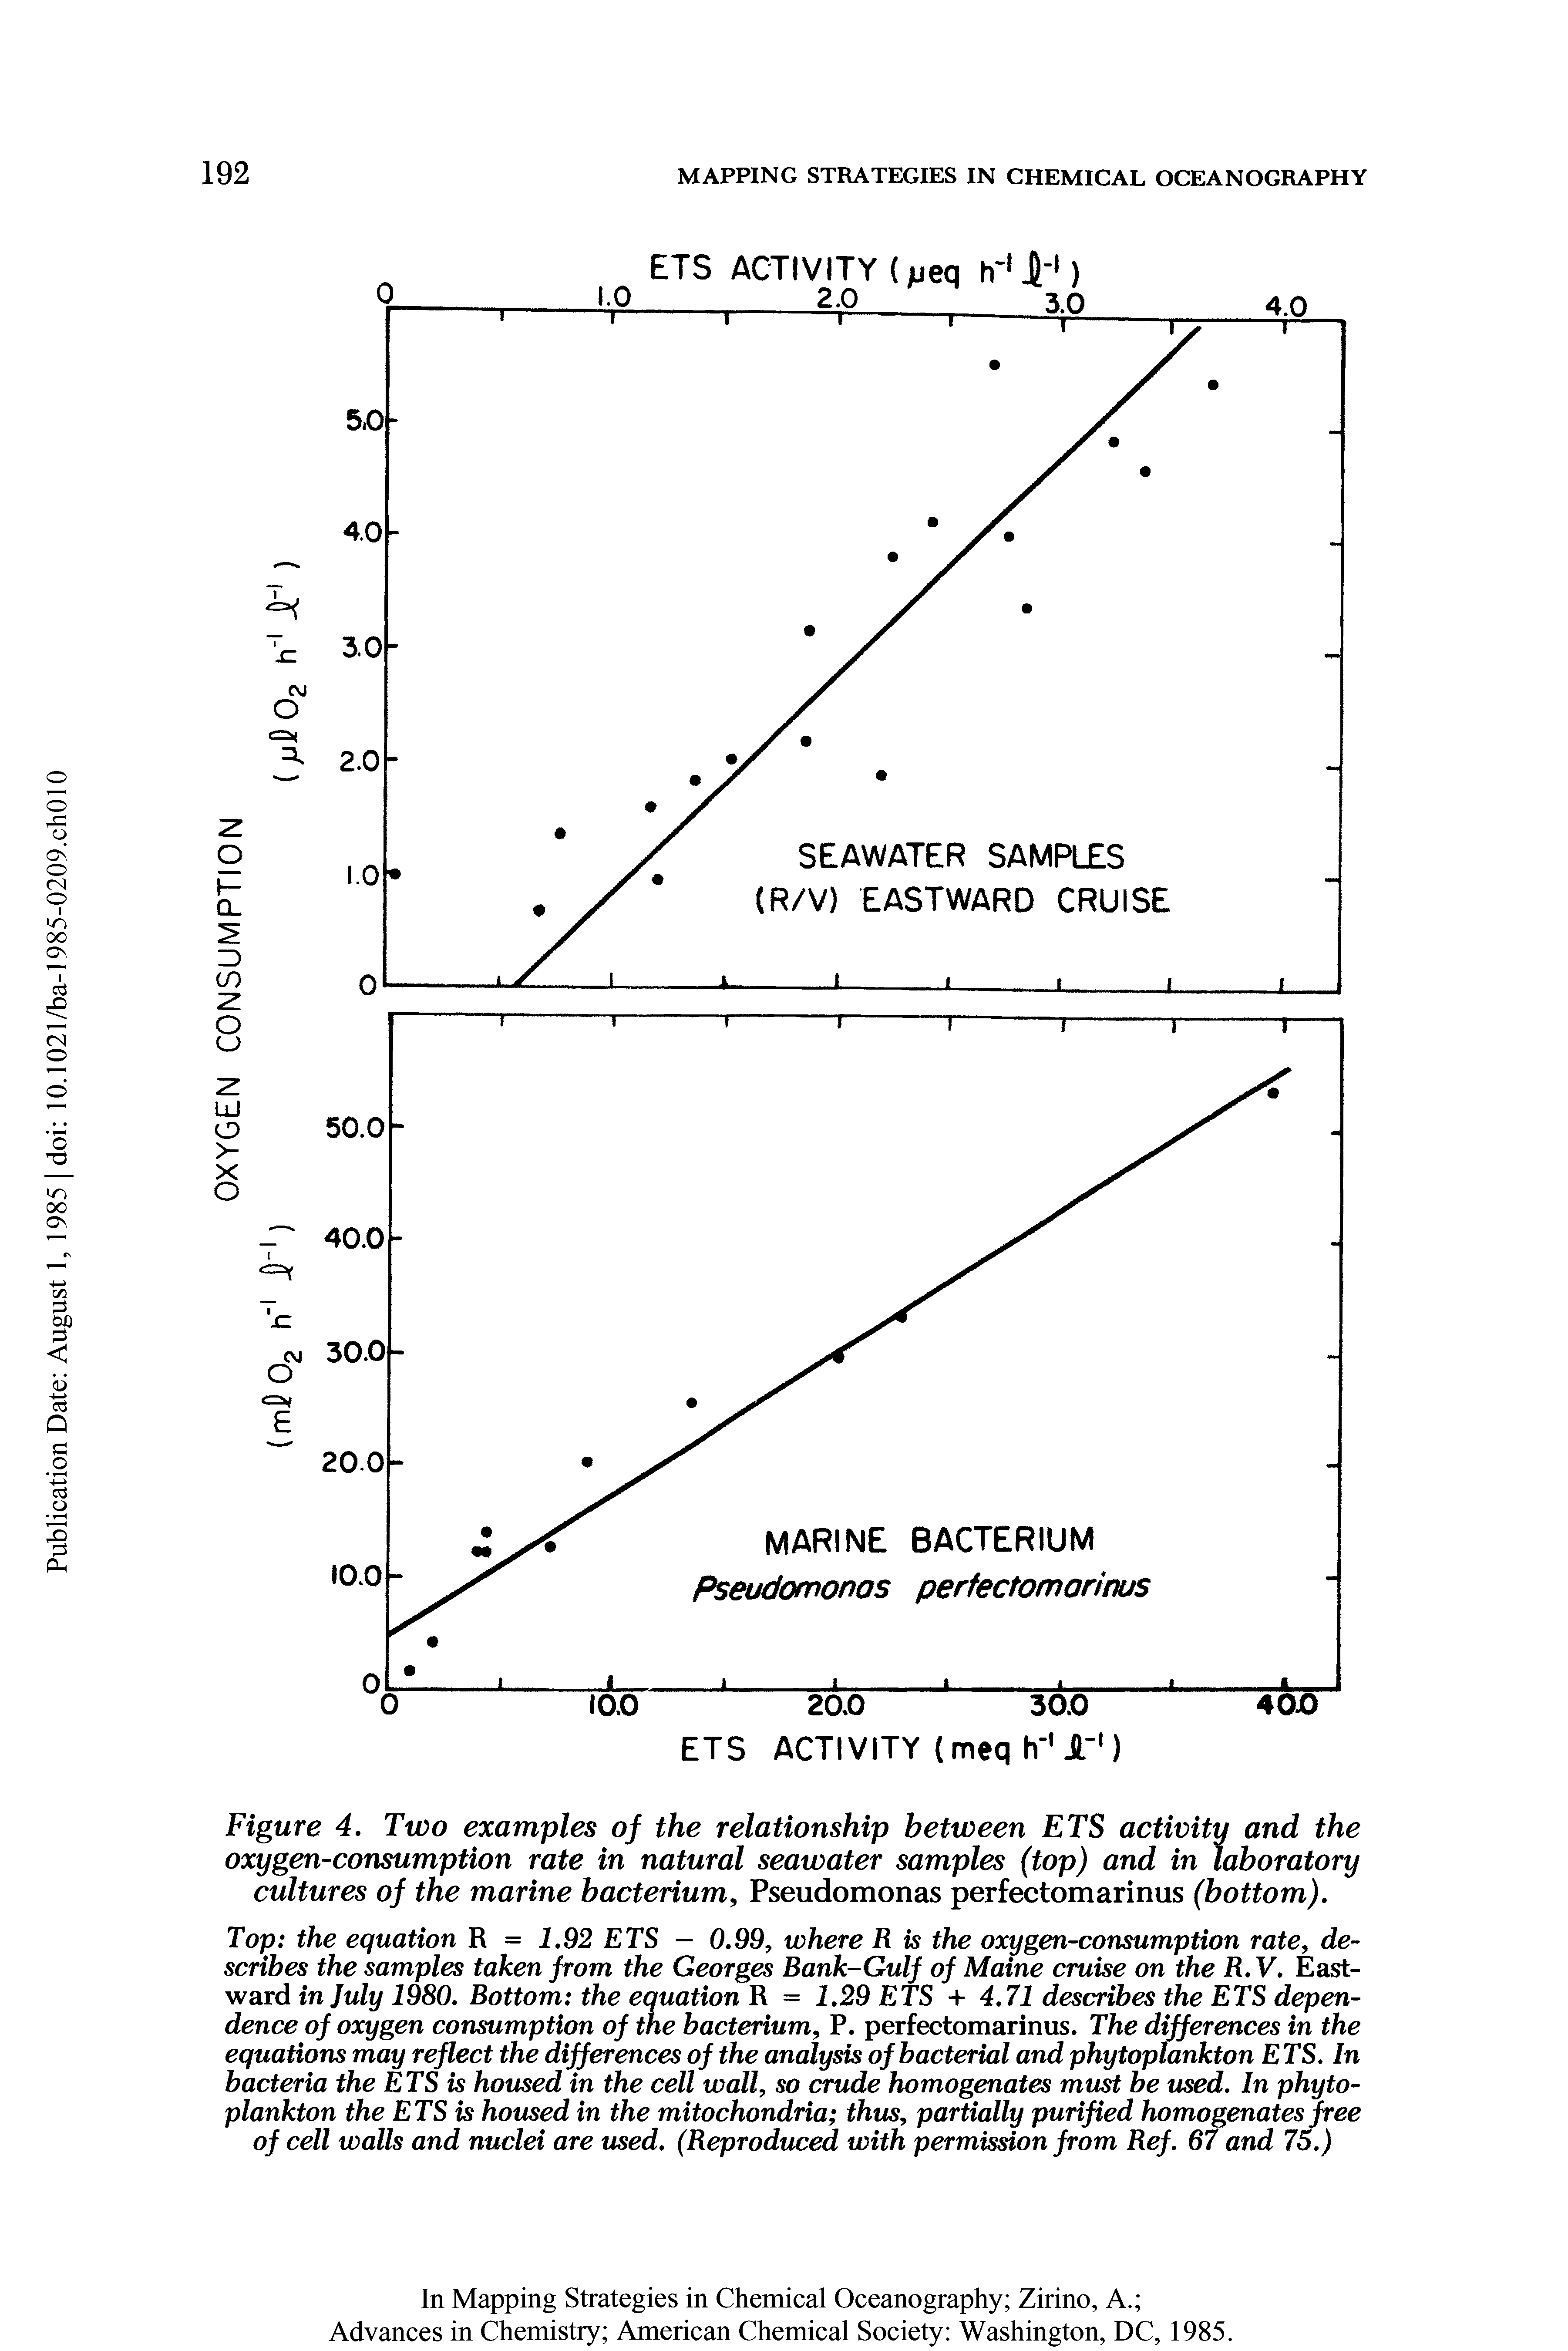 Figure 4. Two examples of the relationship between ETS activity and the oxygen-consumption rate in natural seawater samples (top) and in laboratory cultures of the marine bacterium Pseudomonas perfectomarinus (bottom).